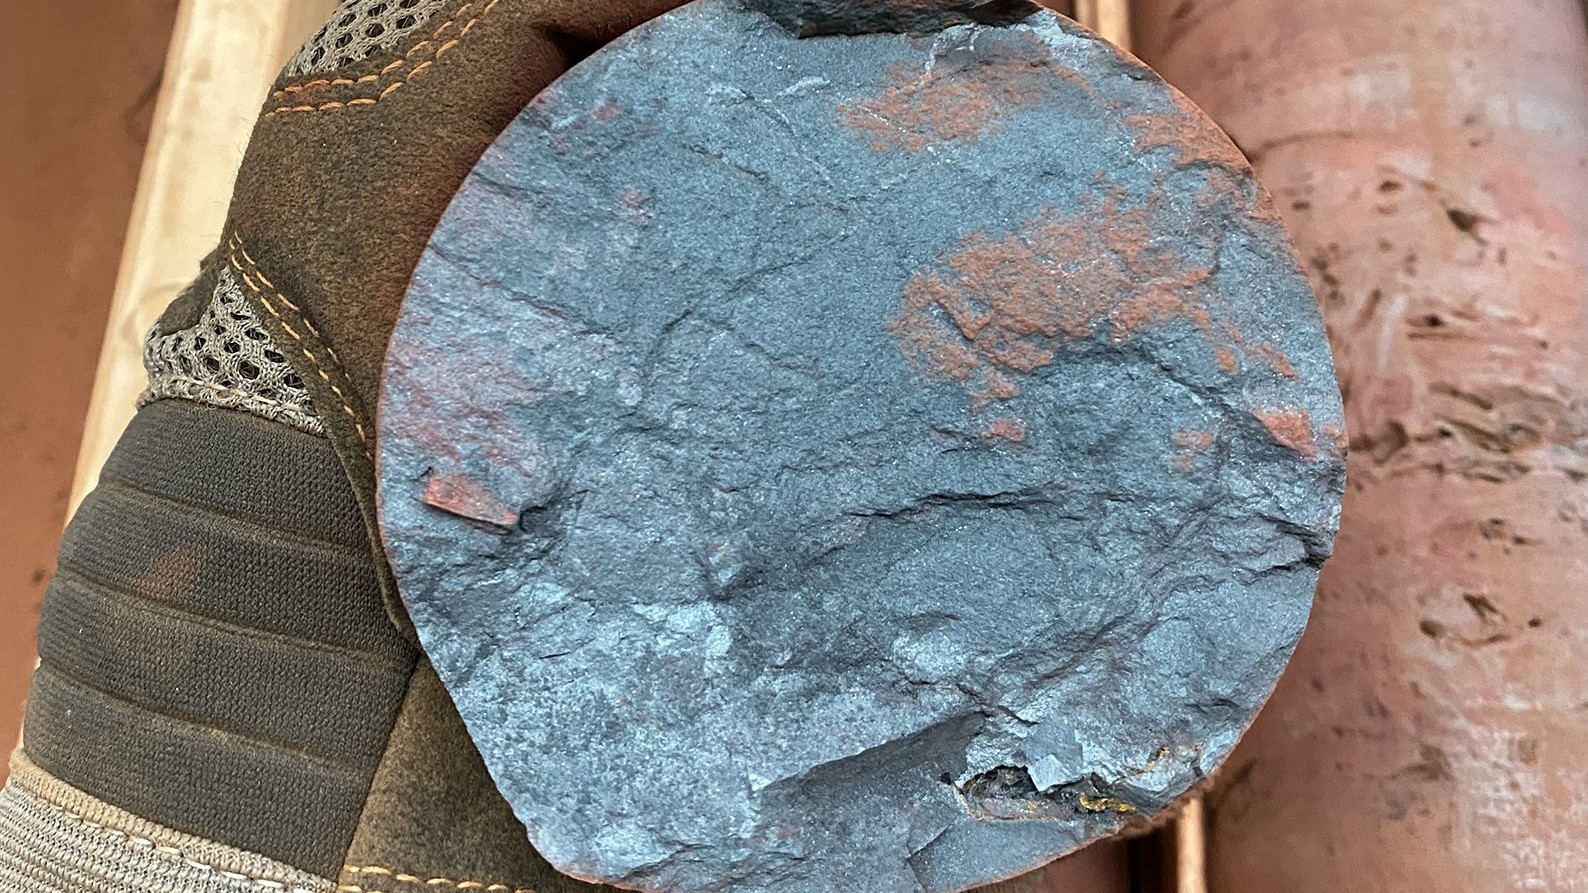  World's largest iron ore deposits formed over 1 billion years ago in supercontinent breakup 